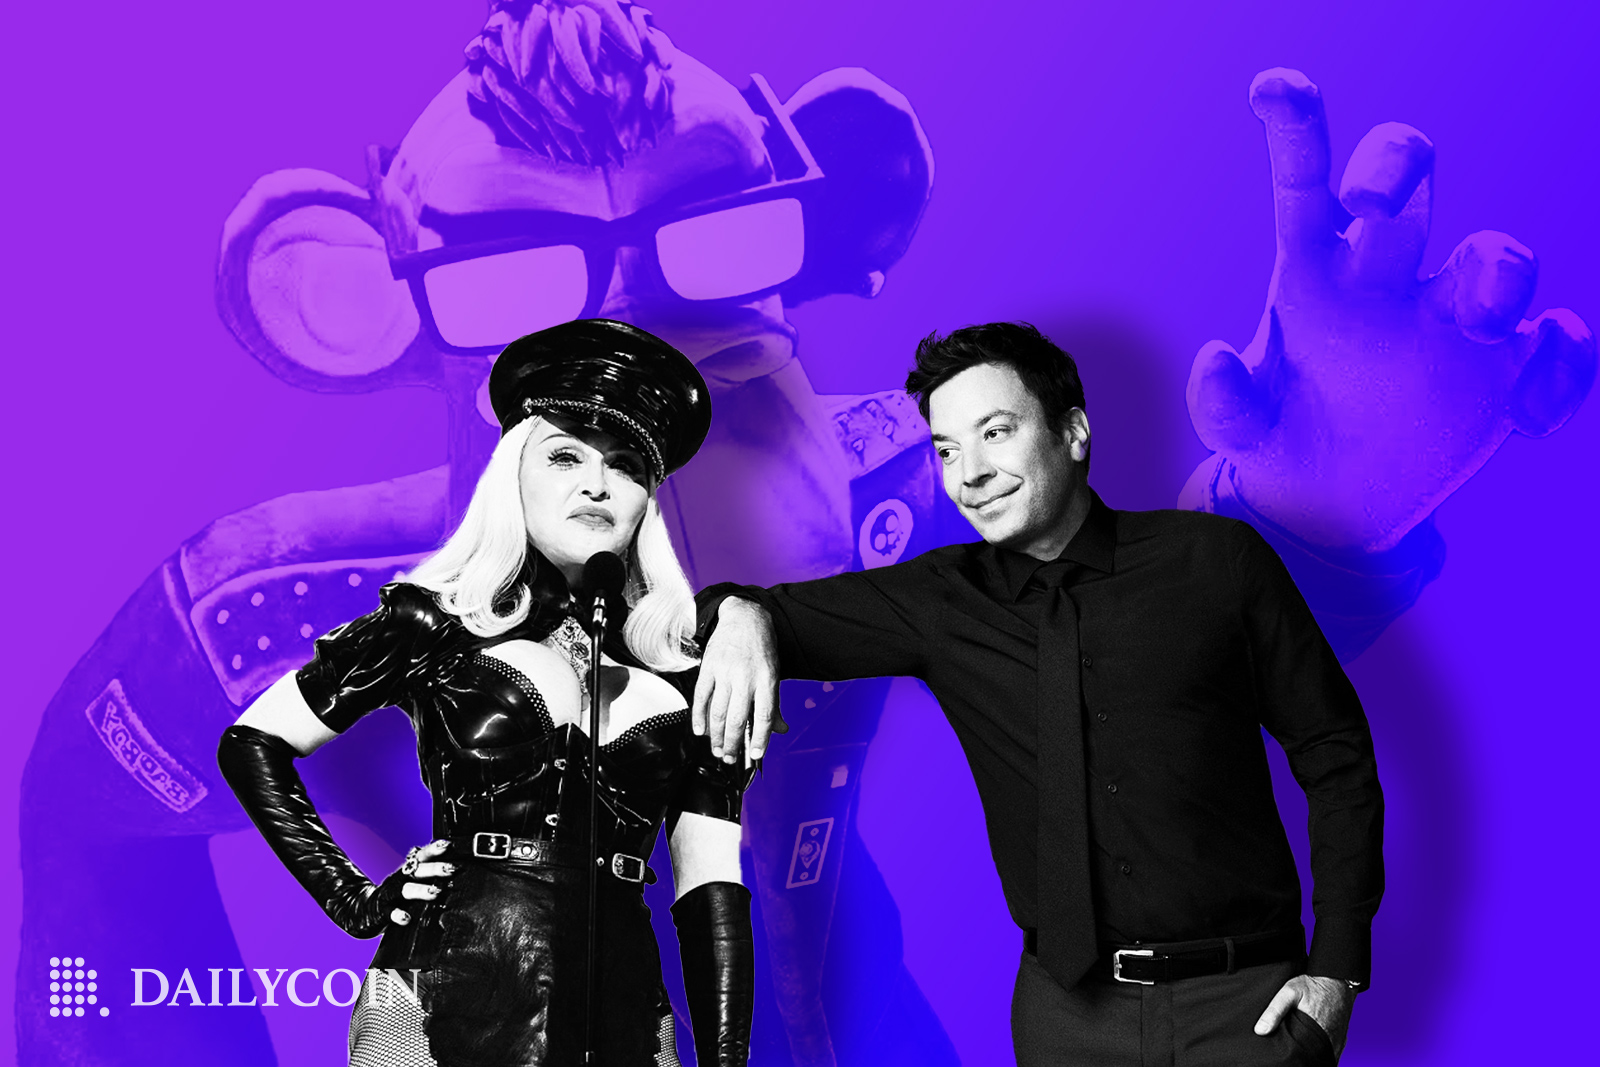 Madonna next to Jimmy Fallon in front of Bored Ape